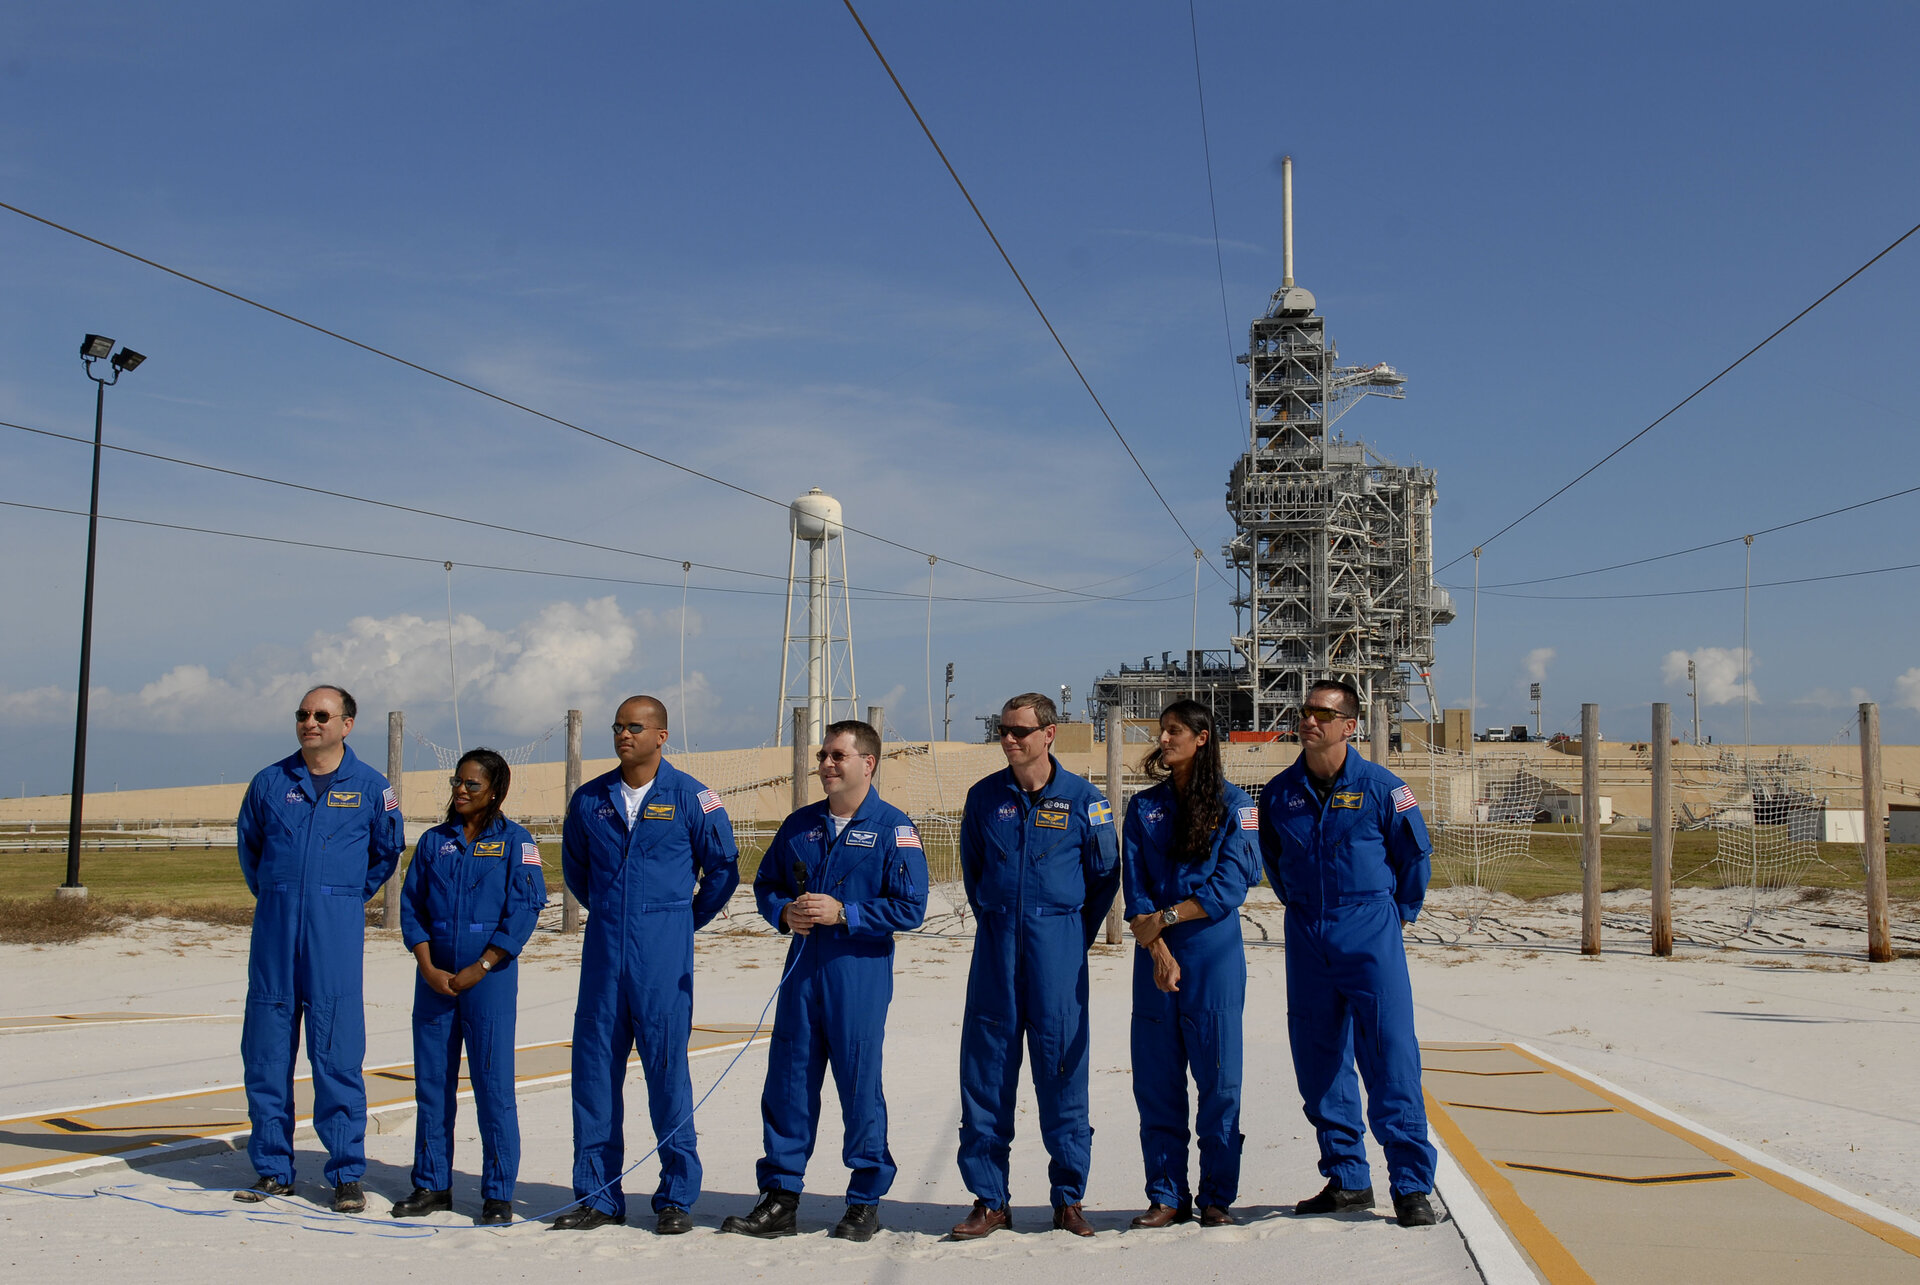 ESA astronaut Christer Fuglesang and the crew of the STS-116 Space Shuttle mission near the launch pad area